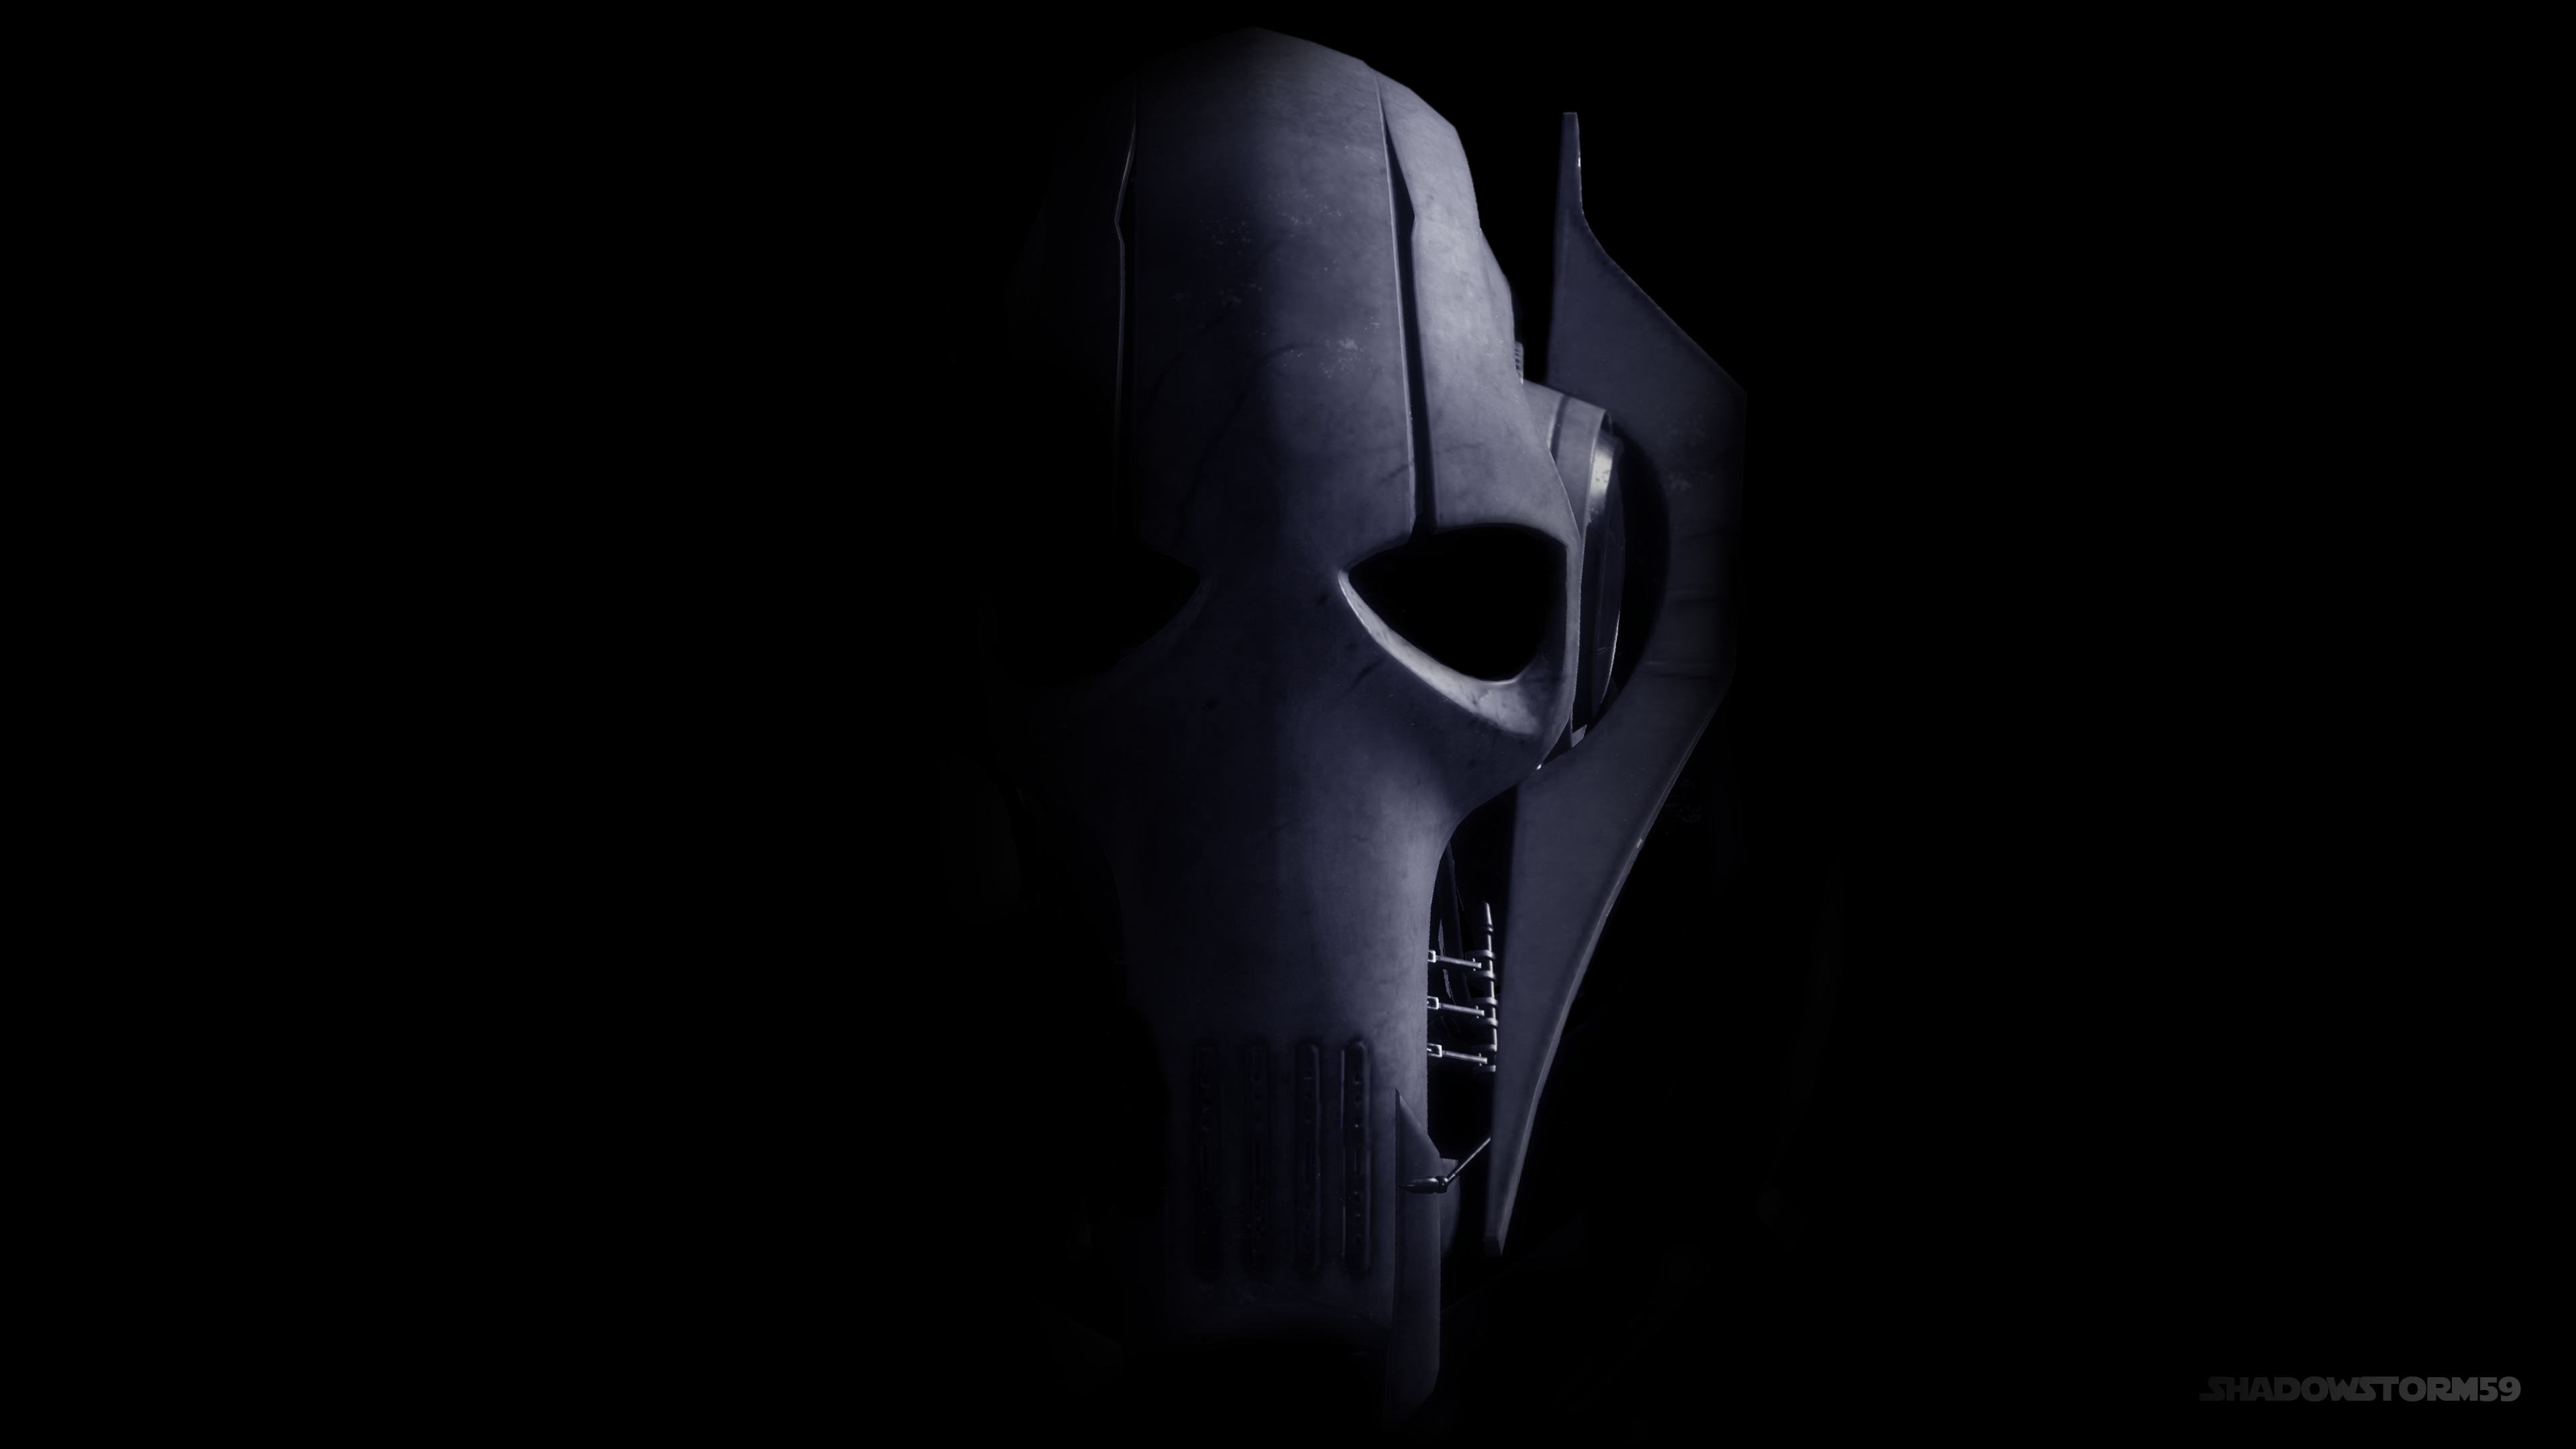 The face of death GRIEVOUS 4k wallpaper: CISDidNothingWrong